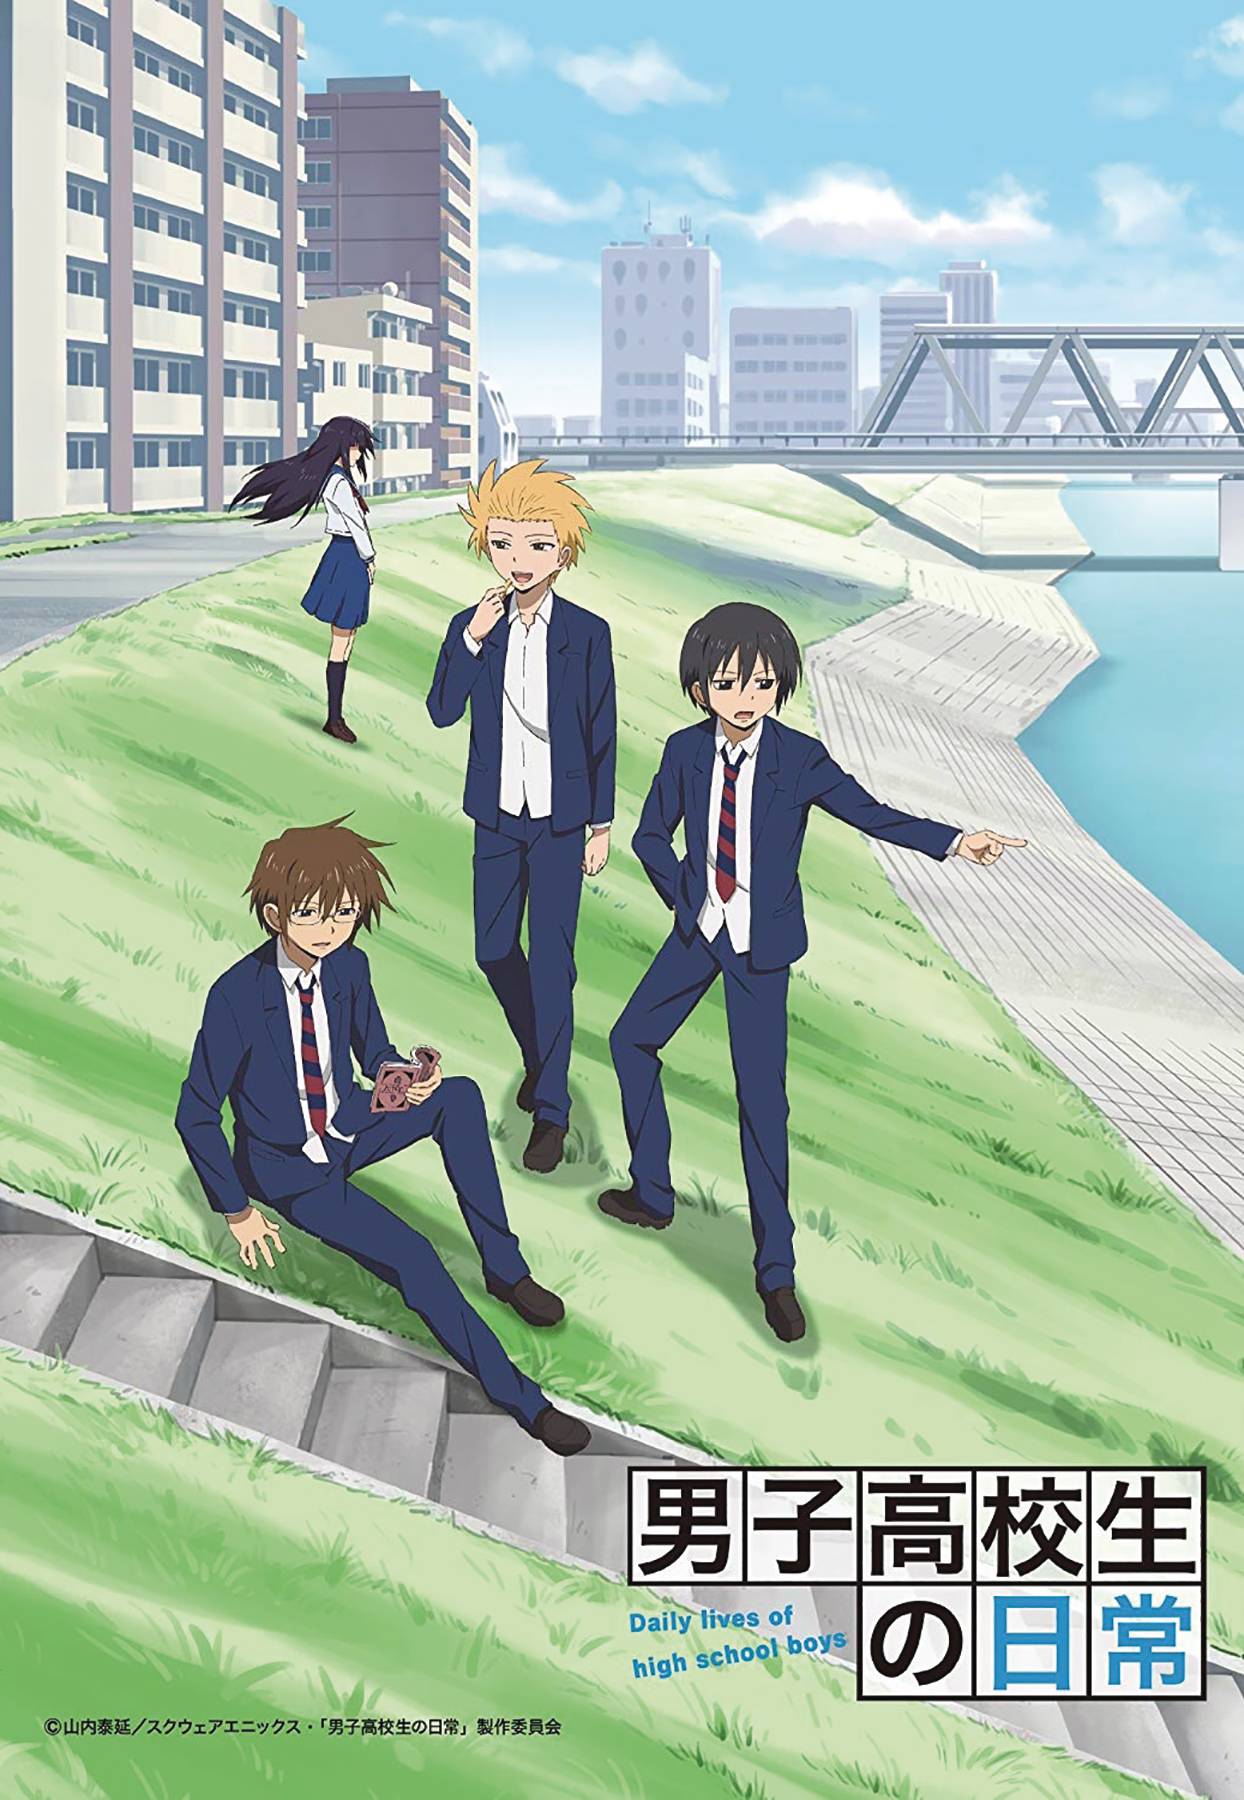 DAILY LIVES OF HIGH SCHOOL BOYS GN 06